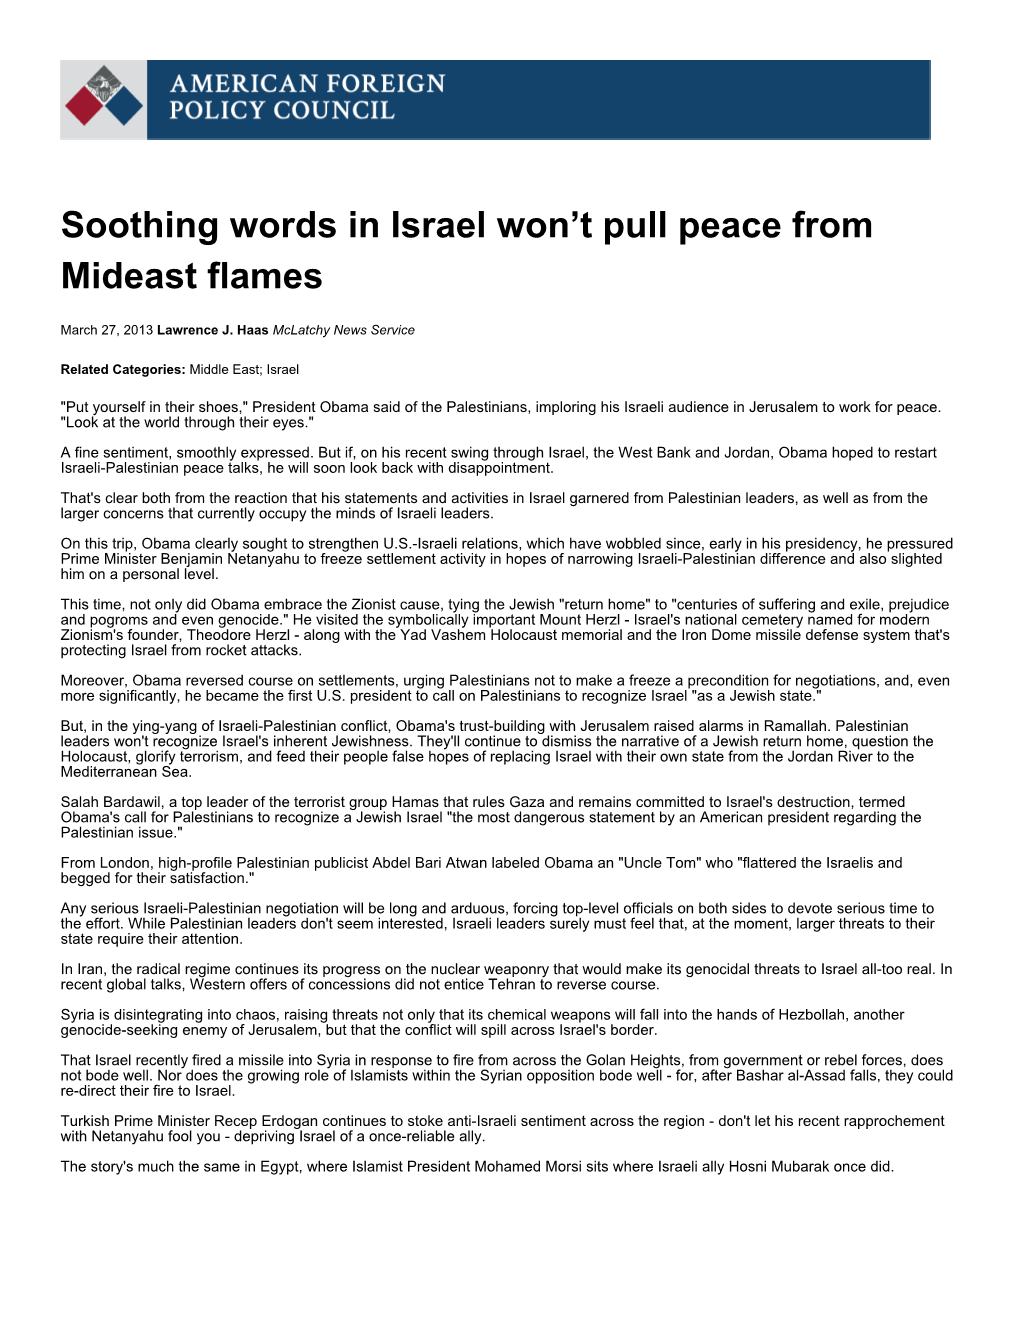 Soothing Words in Israel Won't Pull Peace from Mideast Flames